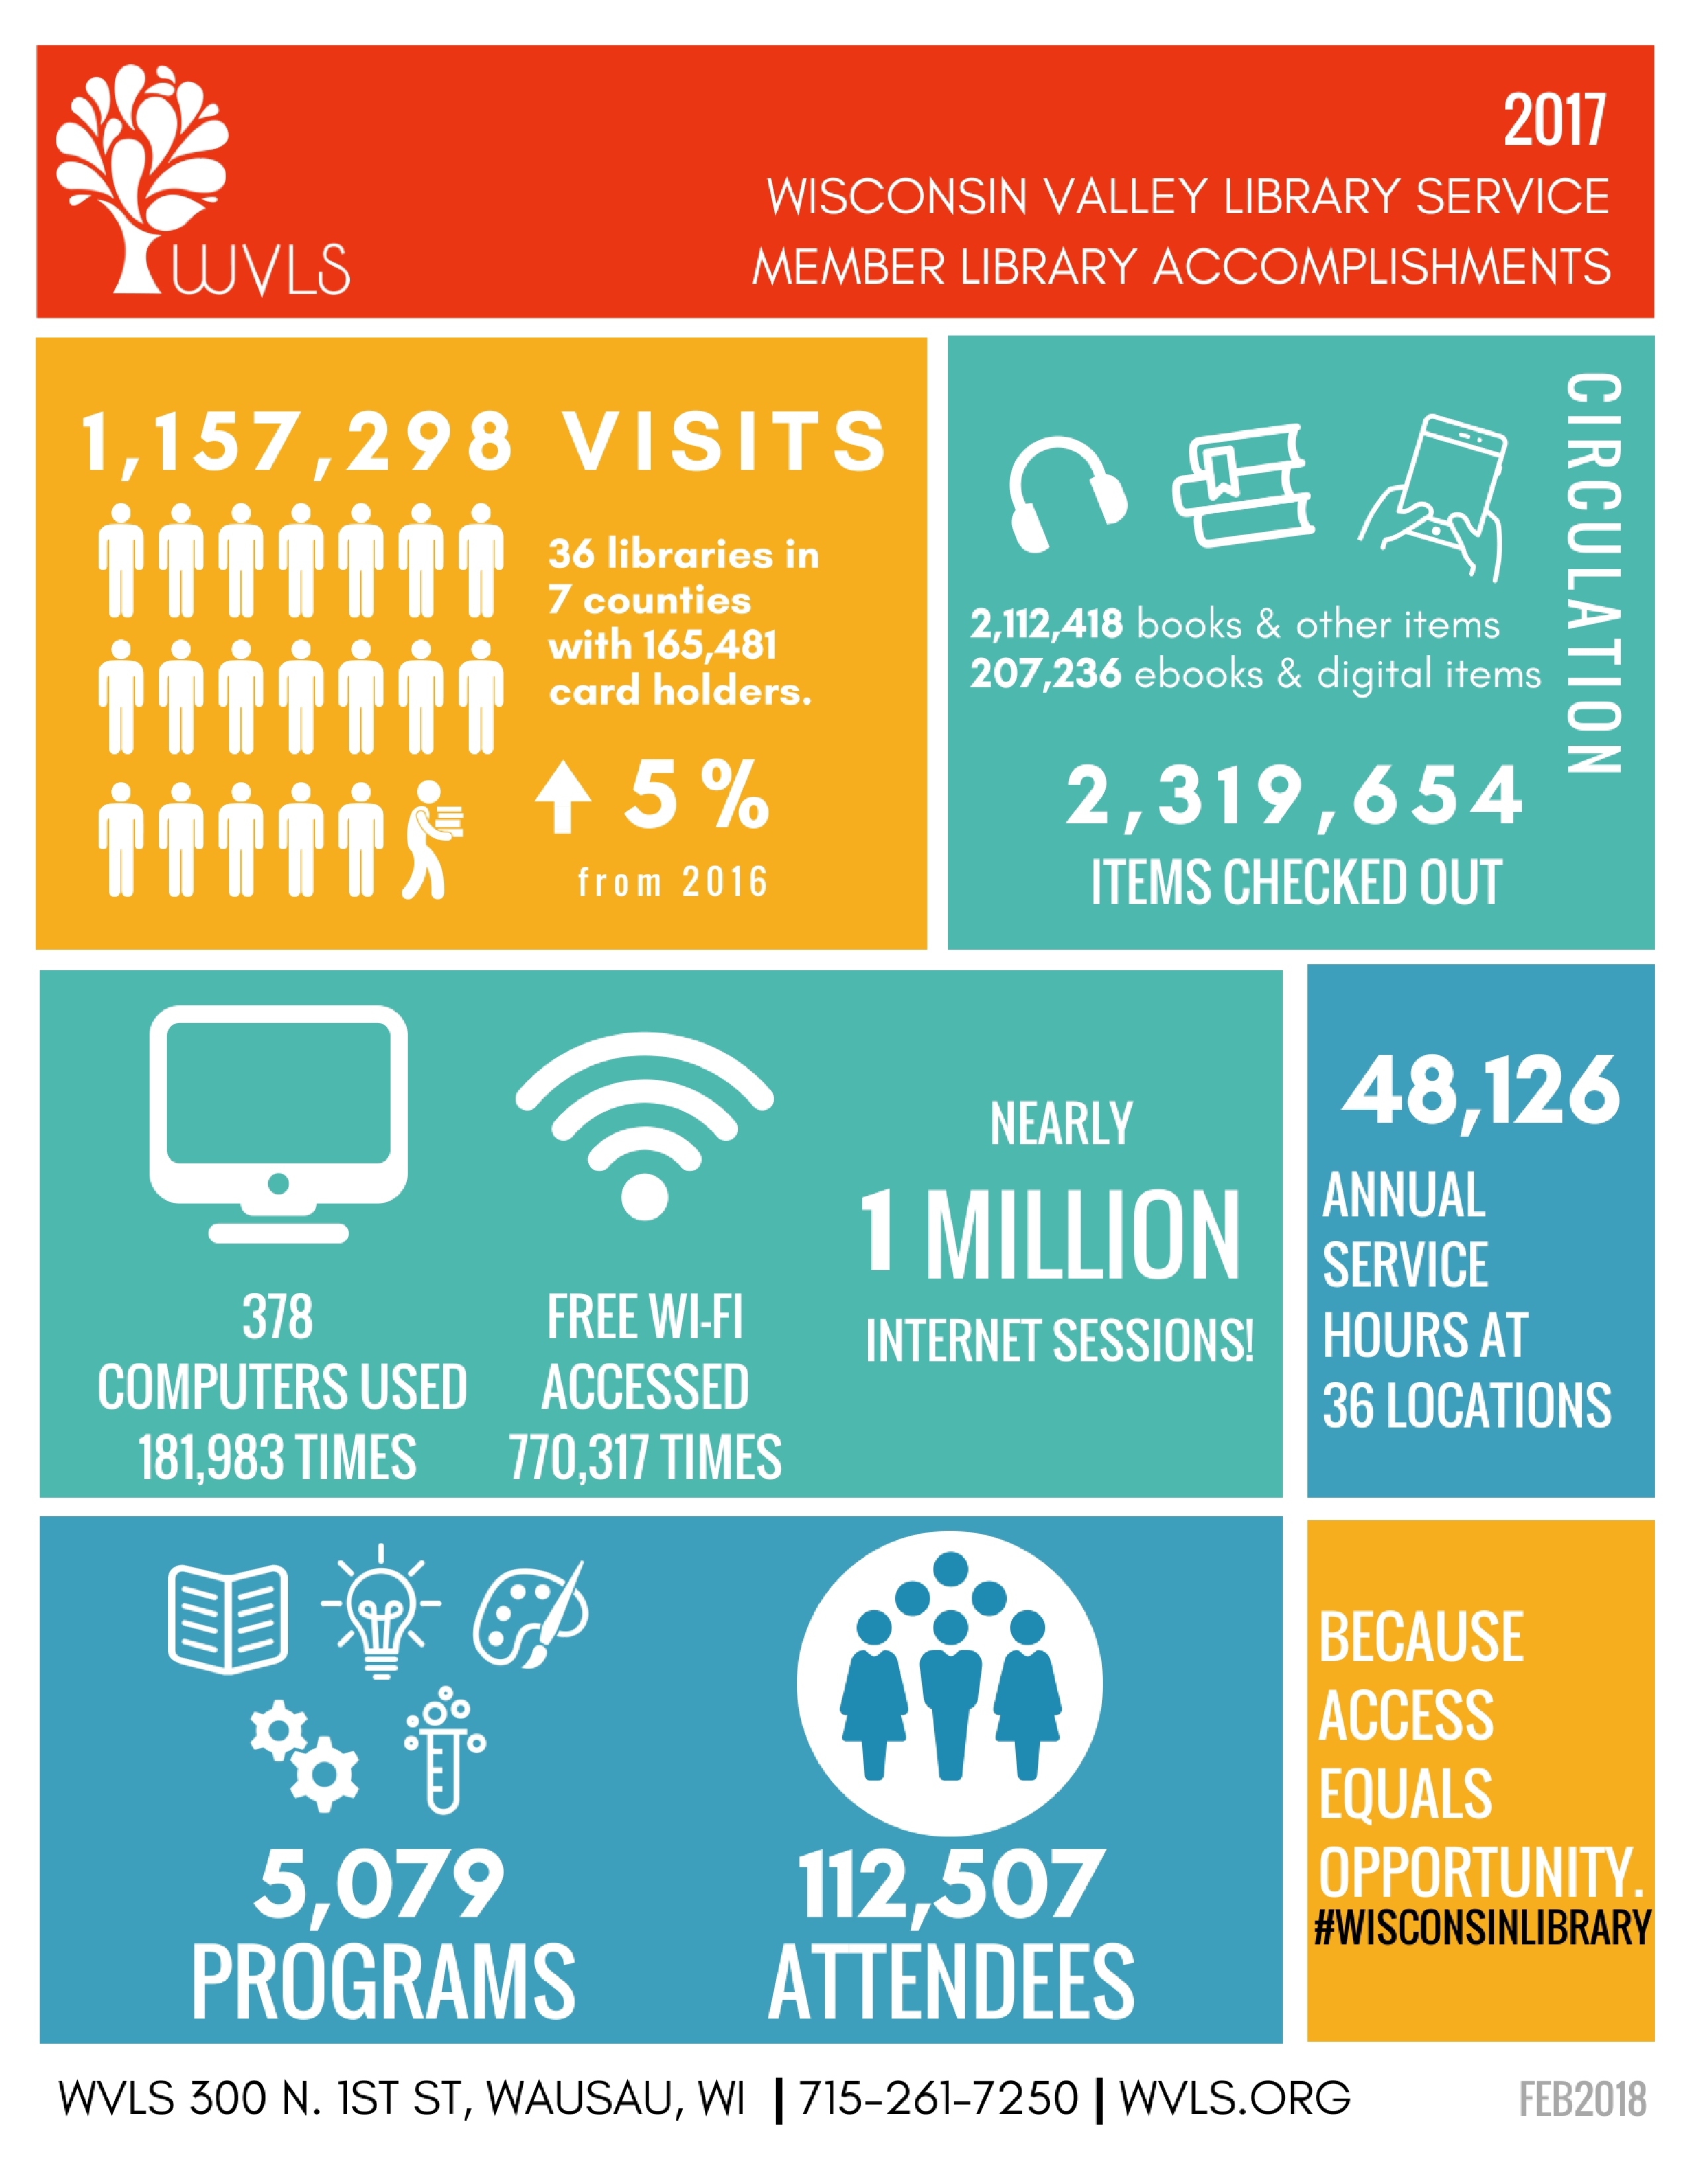 Wisconsin Valley Library service member library accomplishments statistics infographic 